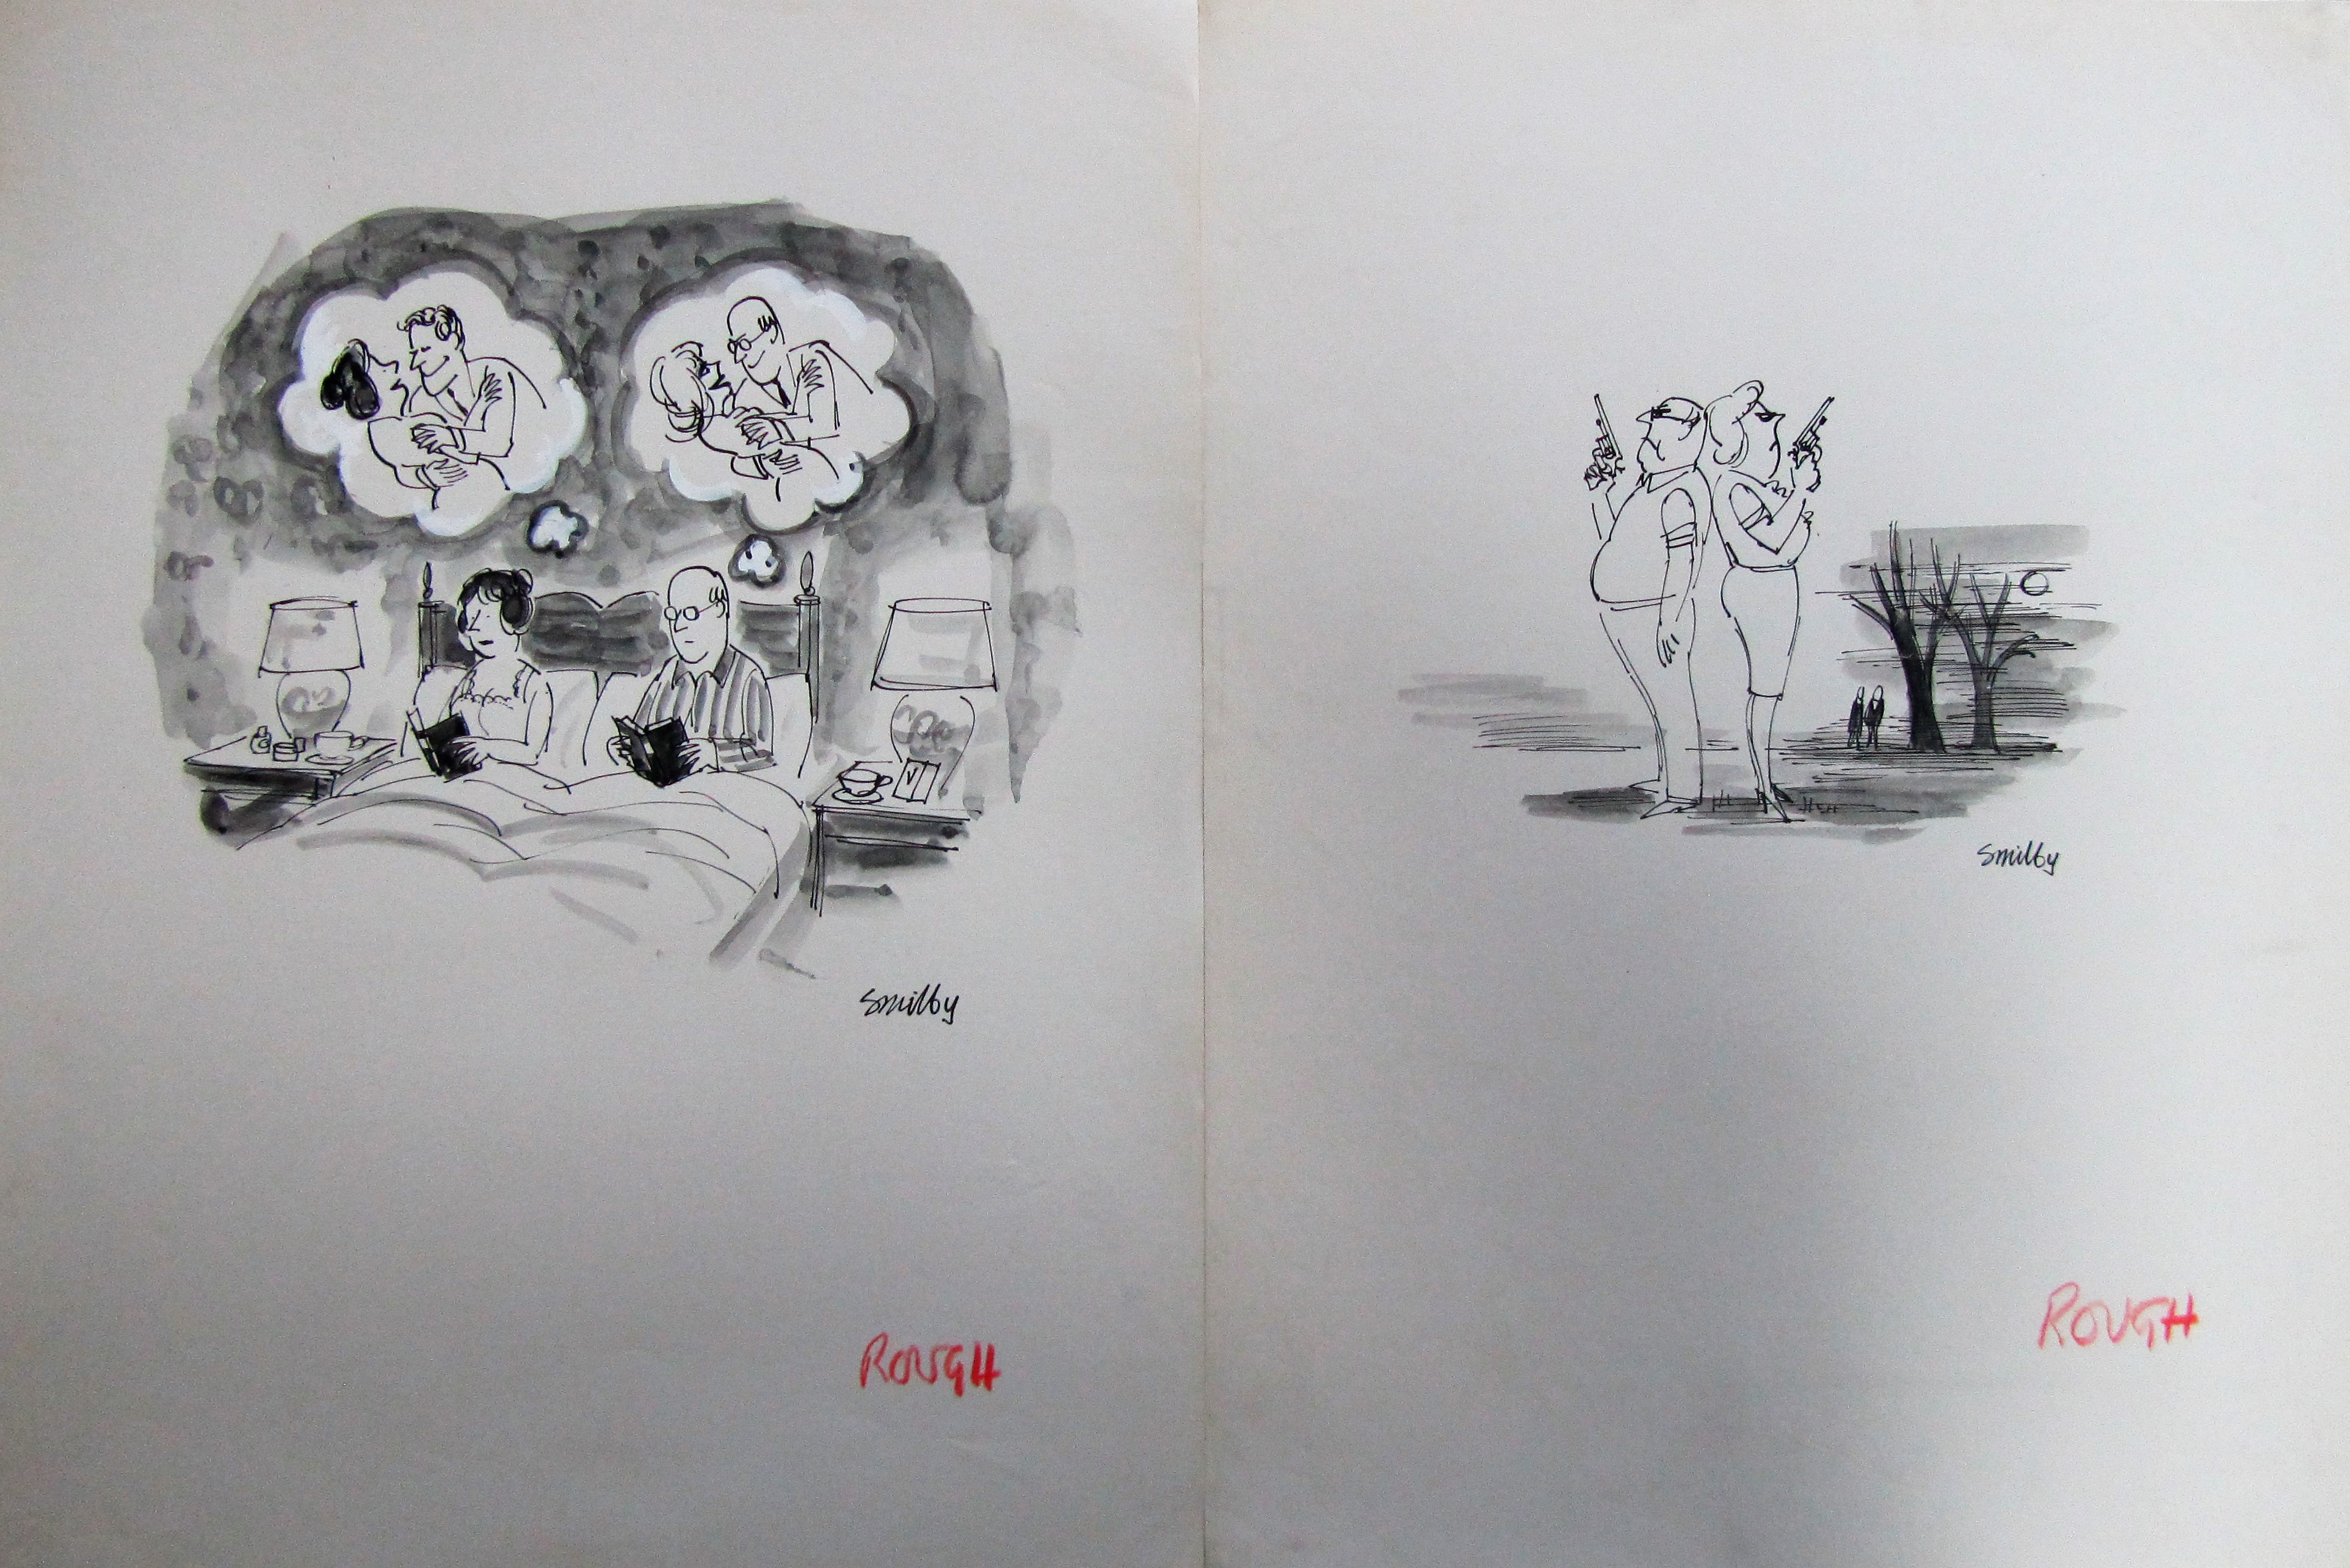 Smilby, Francis Wilford-Smith a collection ink & pen 'Romance, Dating' themed artists rough drawings - Image 6 of 6